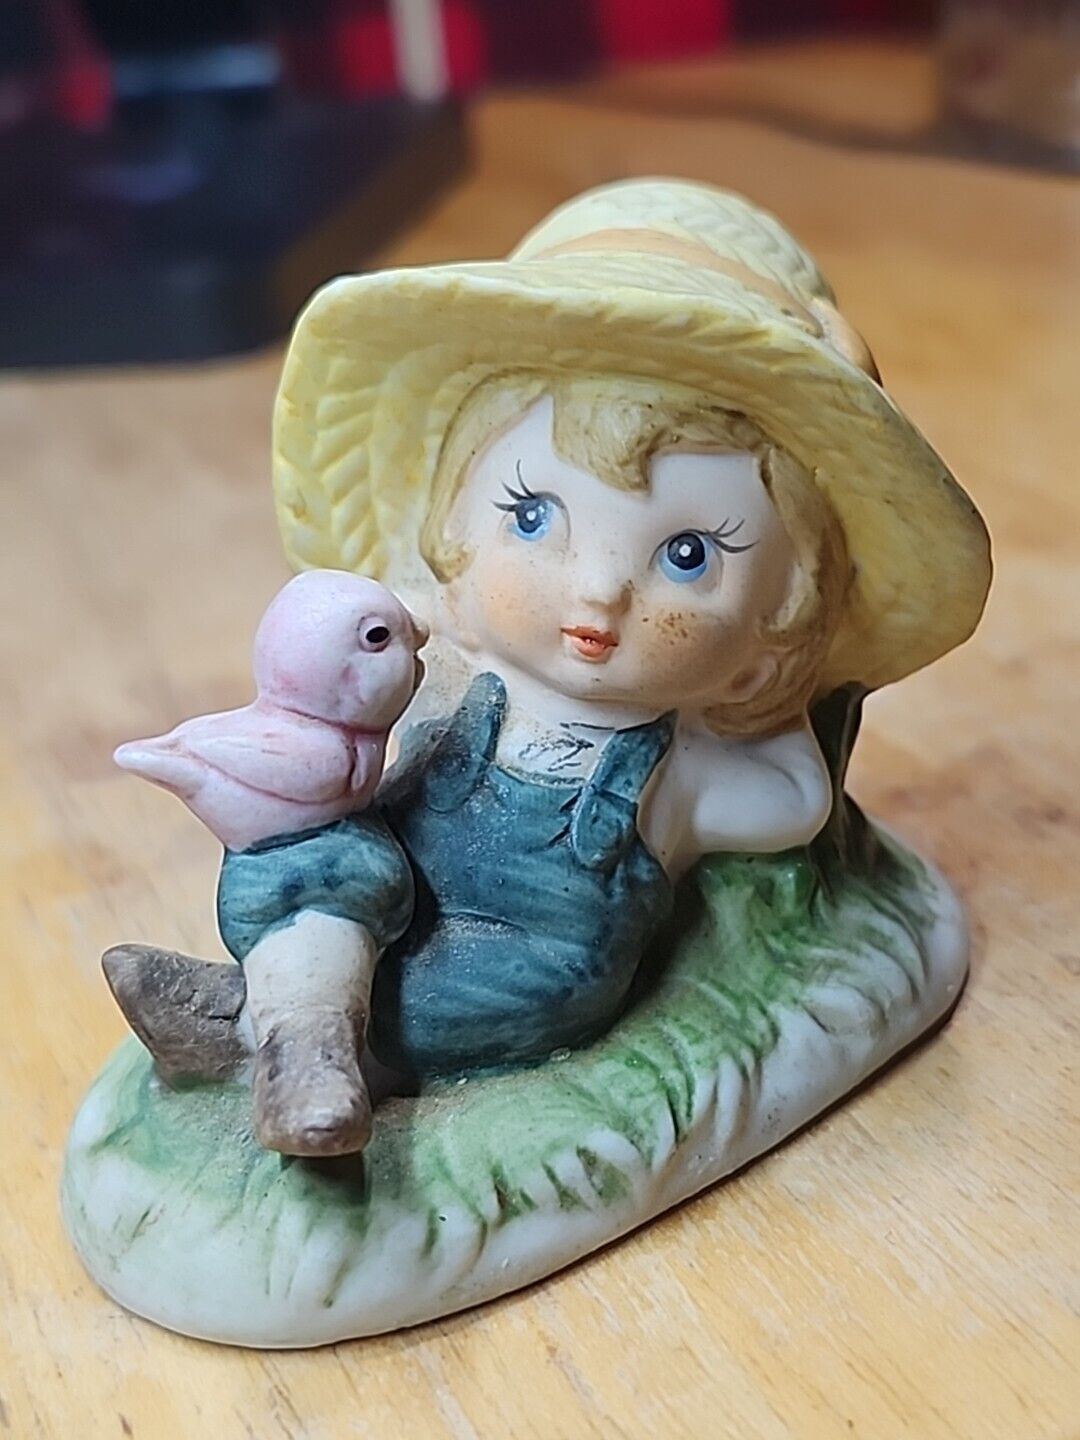 Vintage Lefton Figurine. Country girl. Overalls. Straw Hat. Bird. Relaxing.